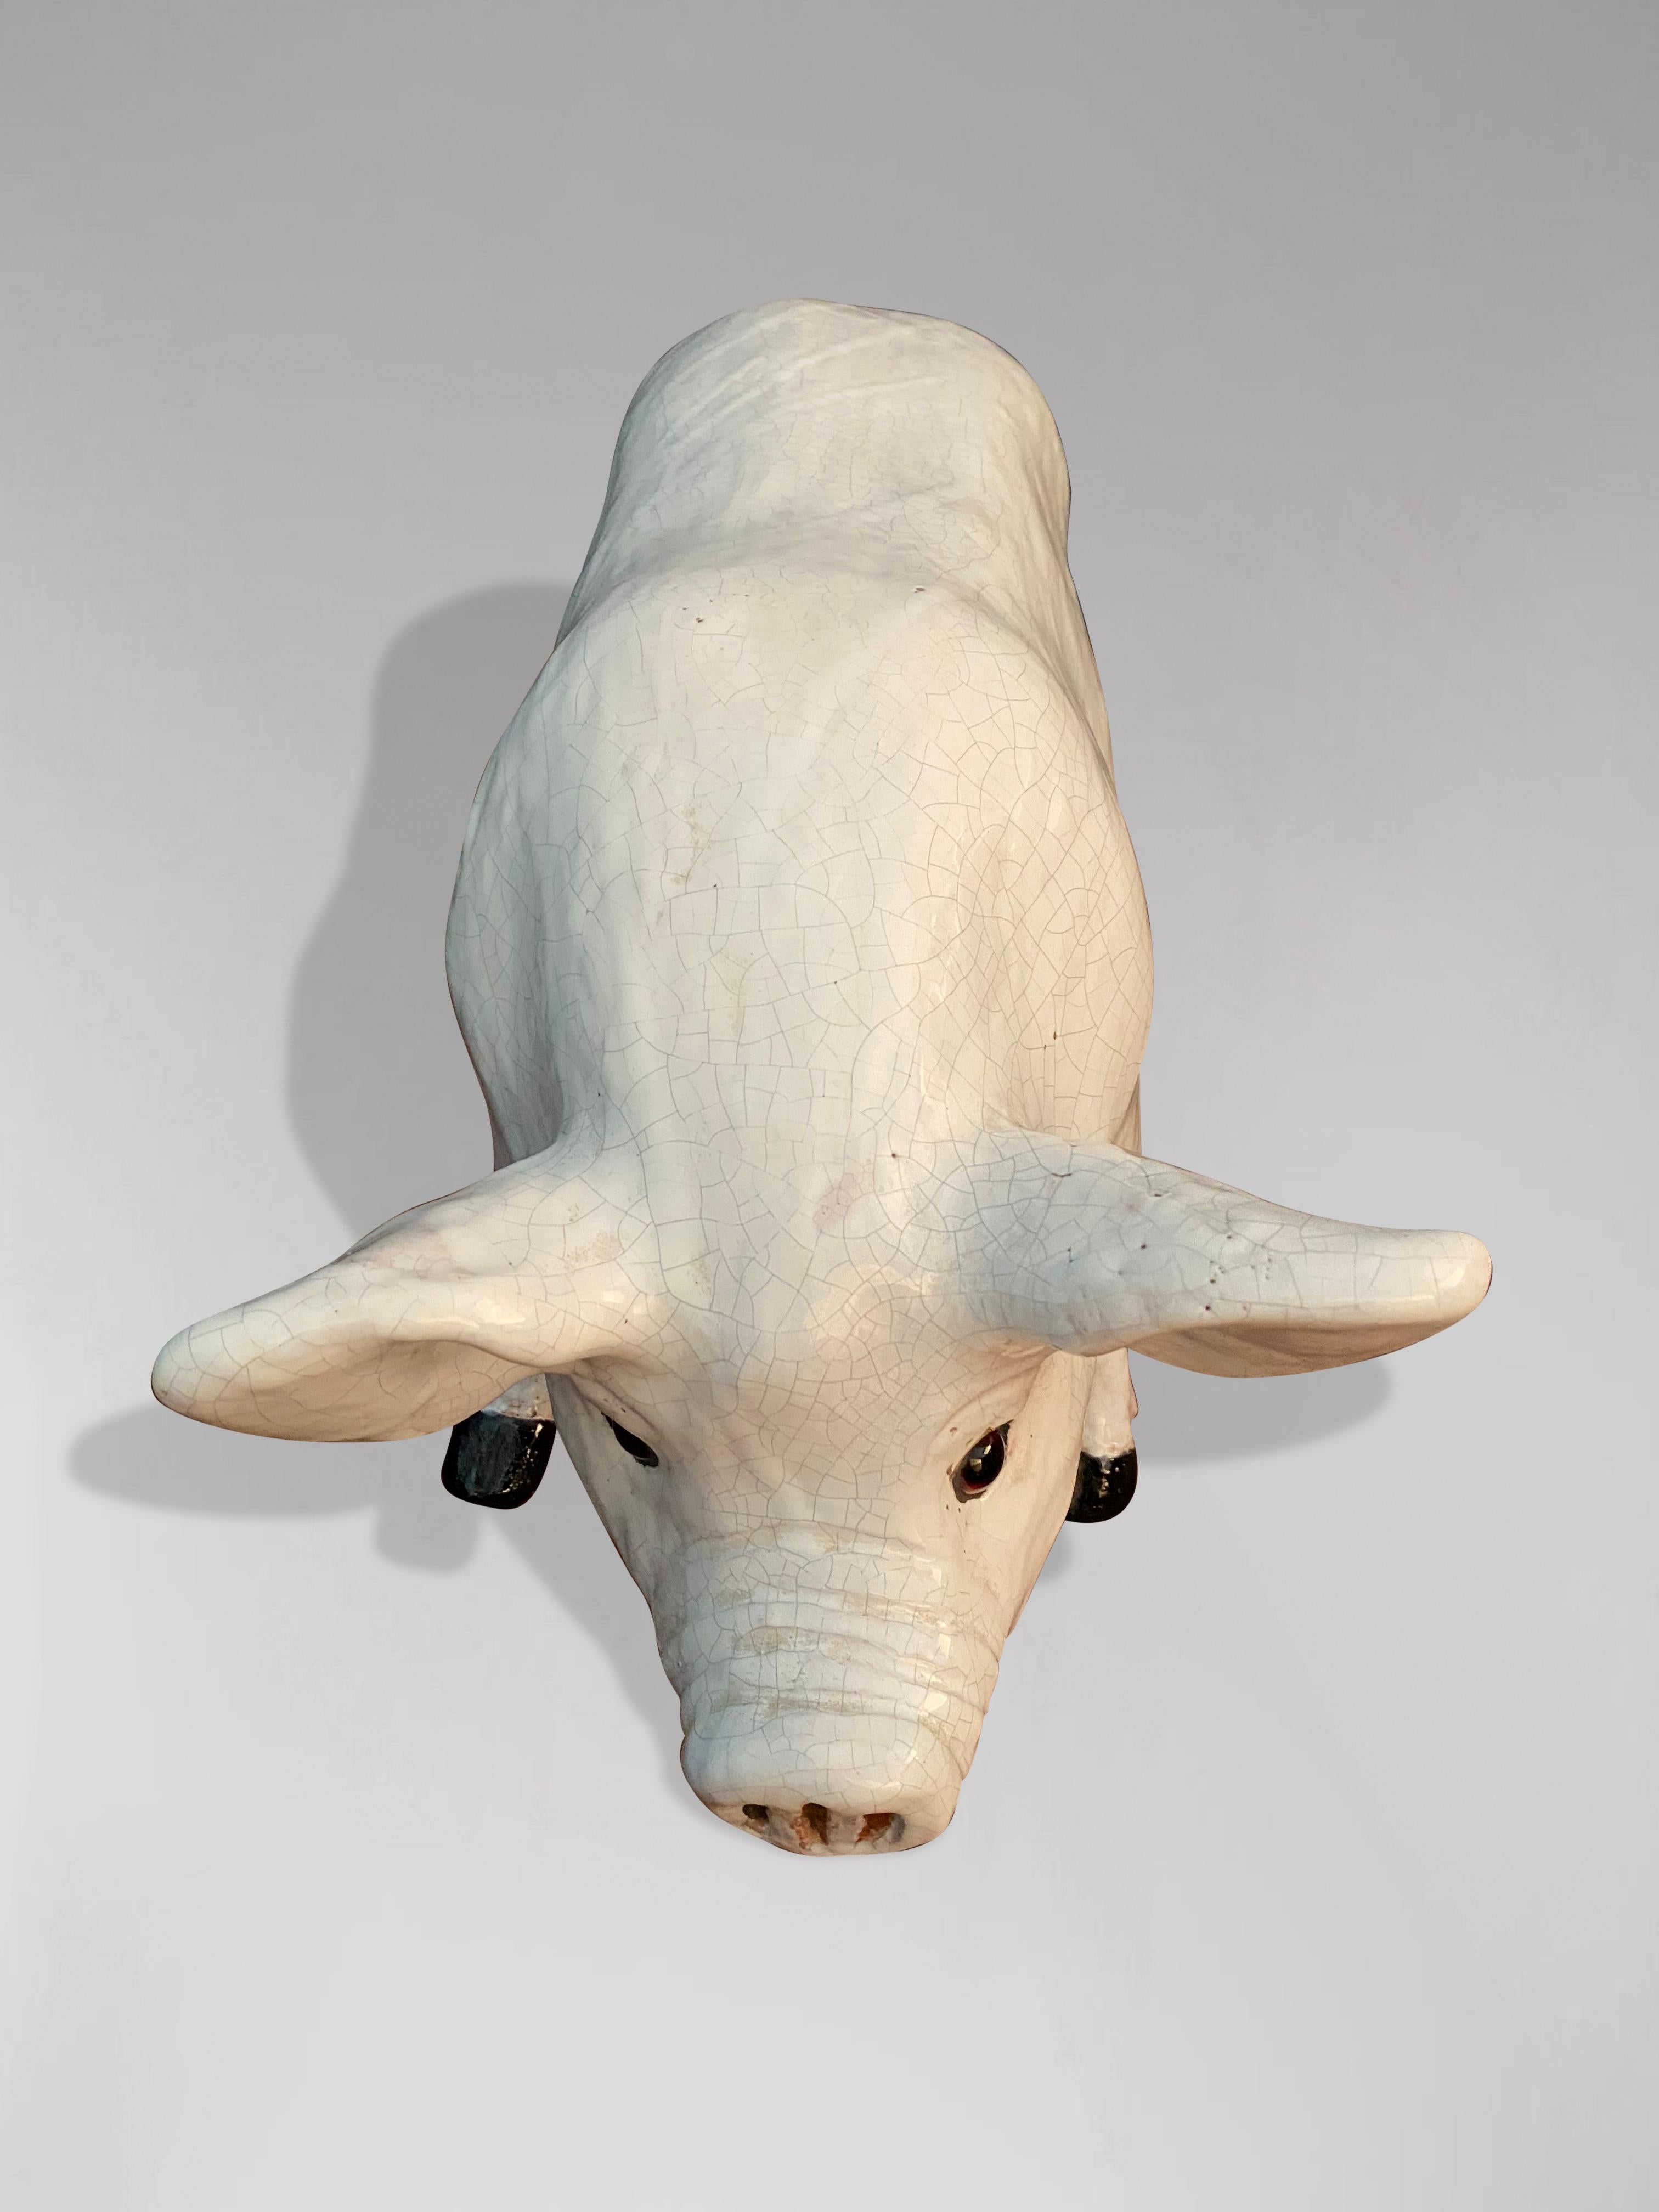 19th Century French Earthenware Pig Sculpture from Bavent in Normandy In Good Condition For Sale In Petworth,West Sussex, GB